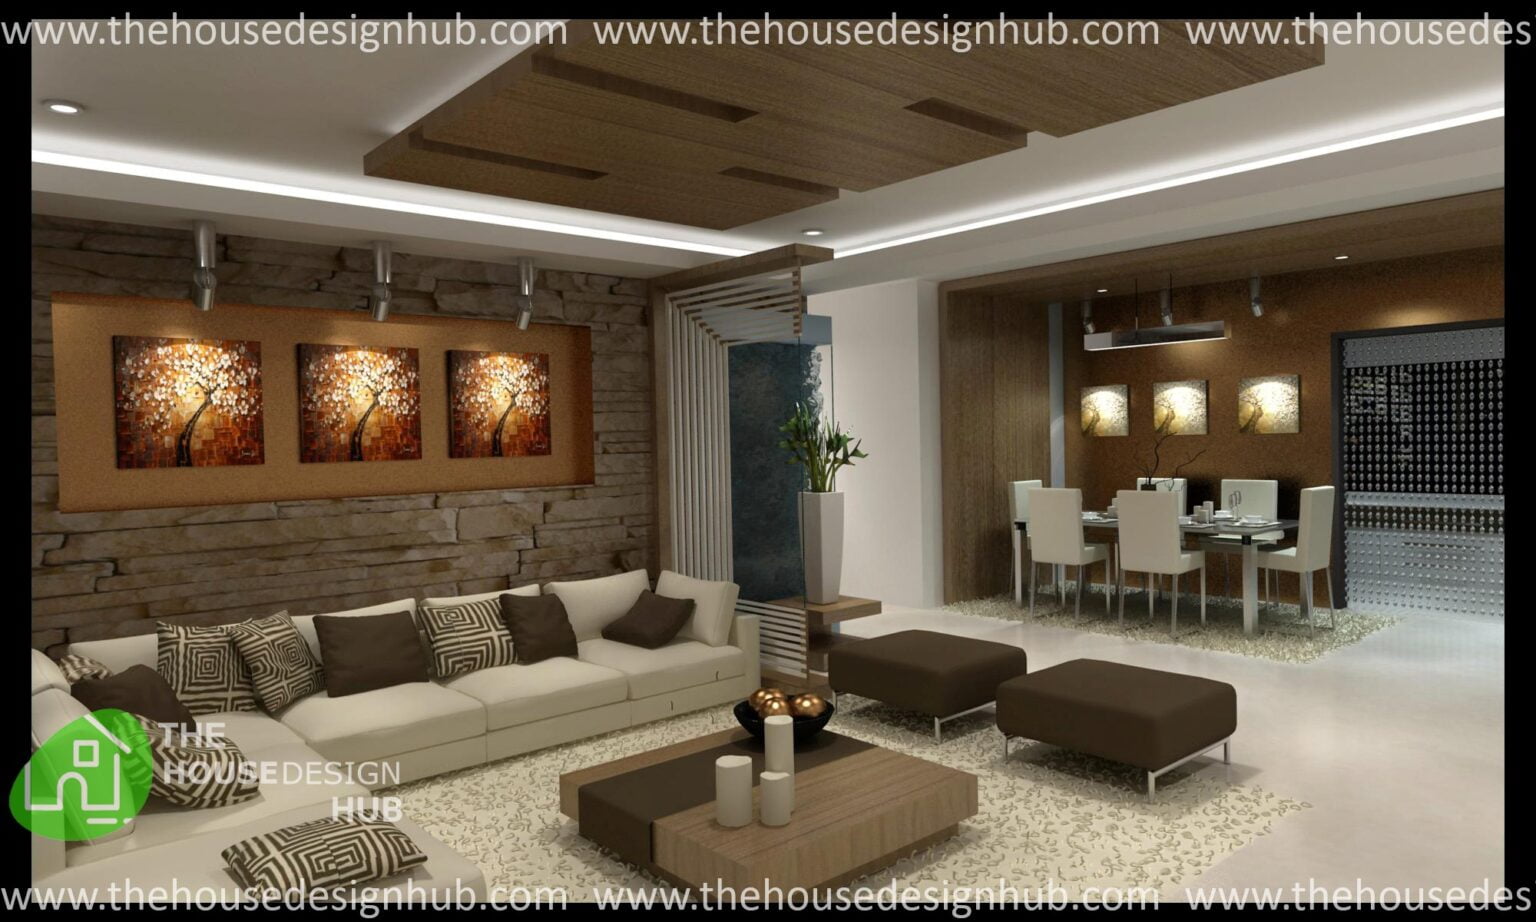 10+ Beautiful Indian Style Living Room Design Theme | The House Design Hub